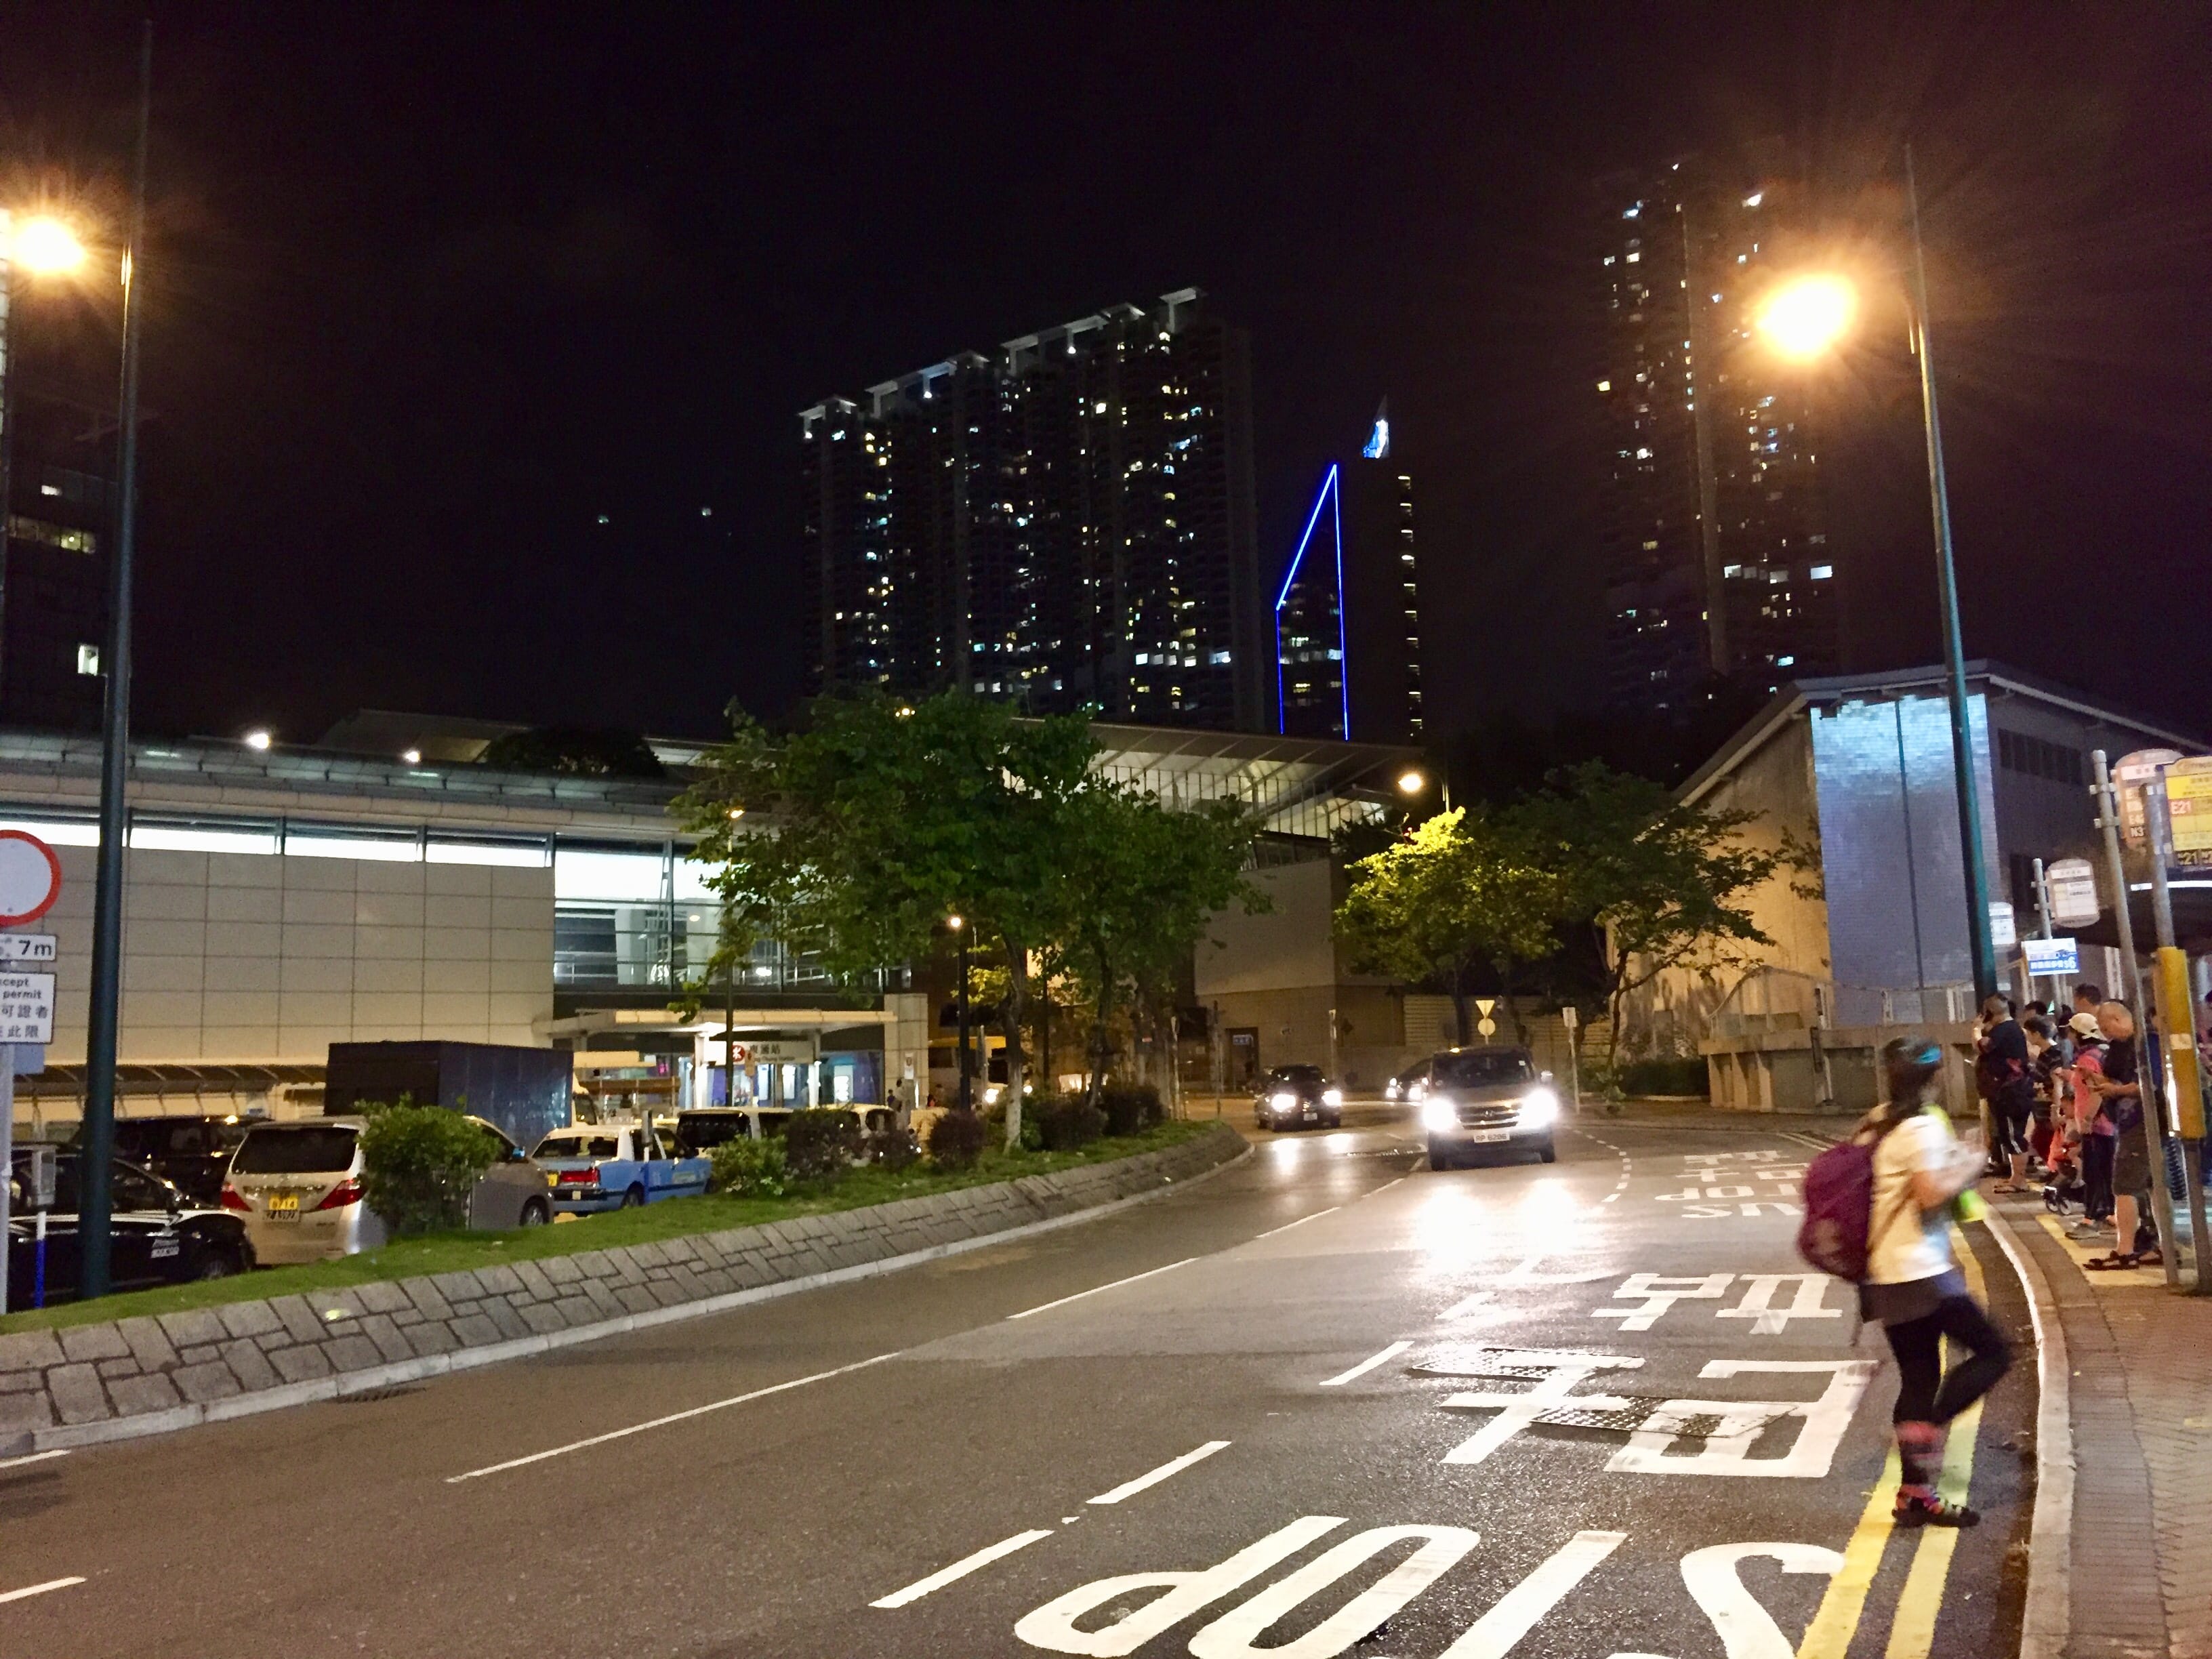 Waiting for Bus E11 at Tung Chung to go home